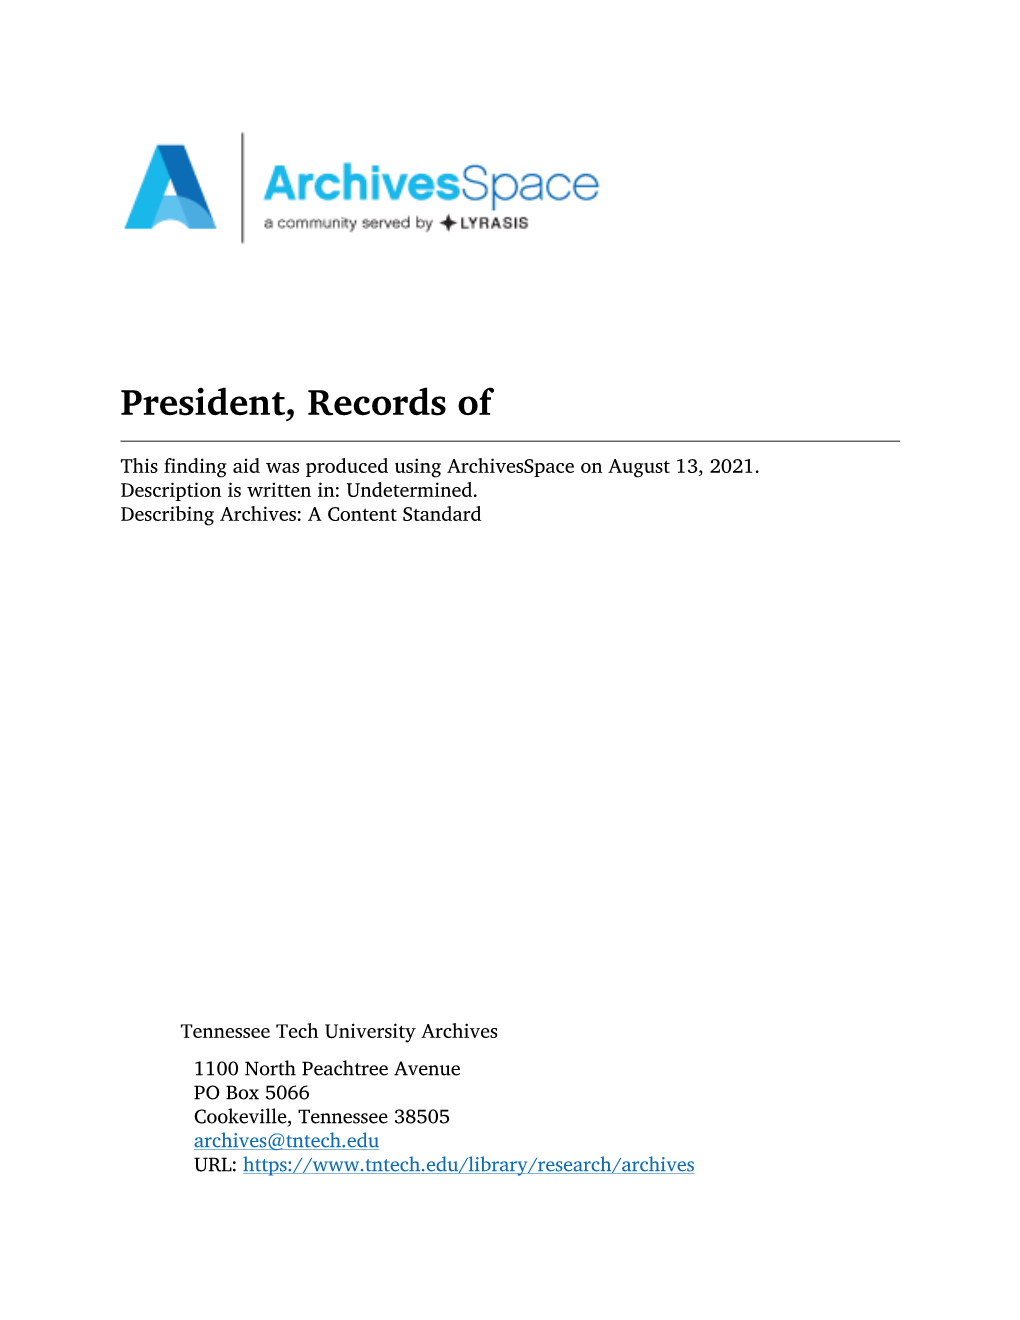 President, Records of This Finding Aid Was Produced Using Archivesspace on August 13, 2021